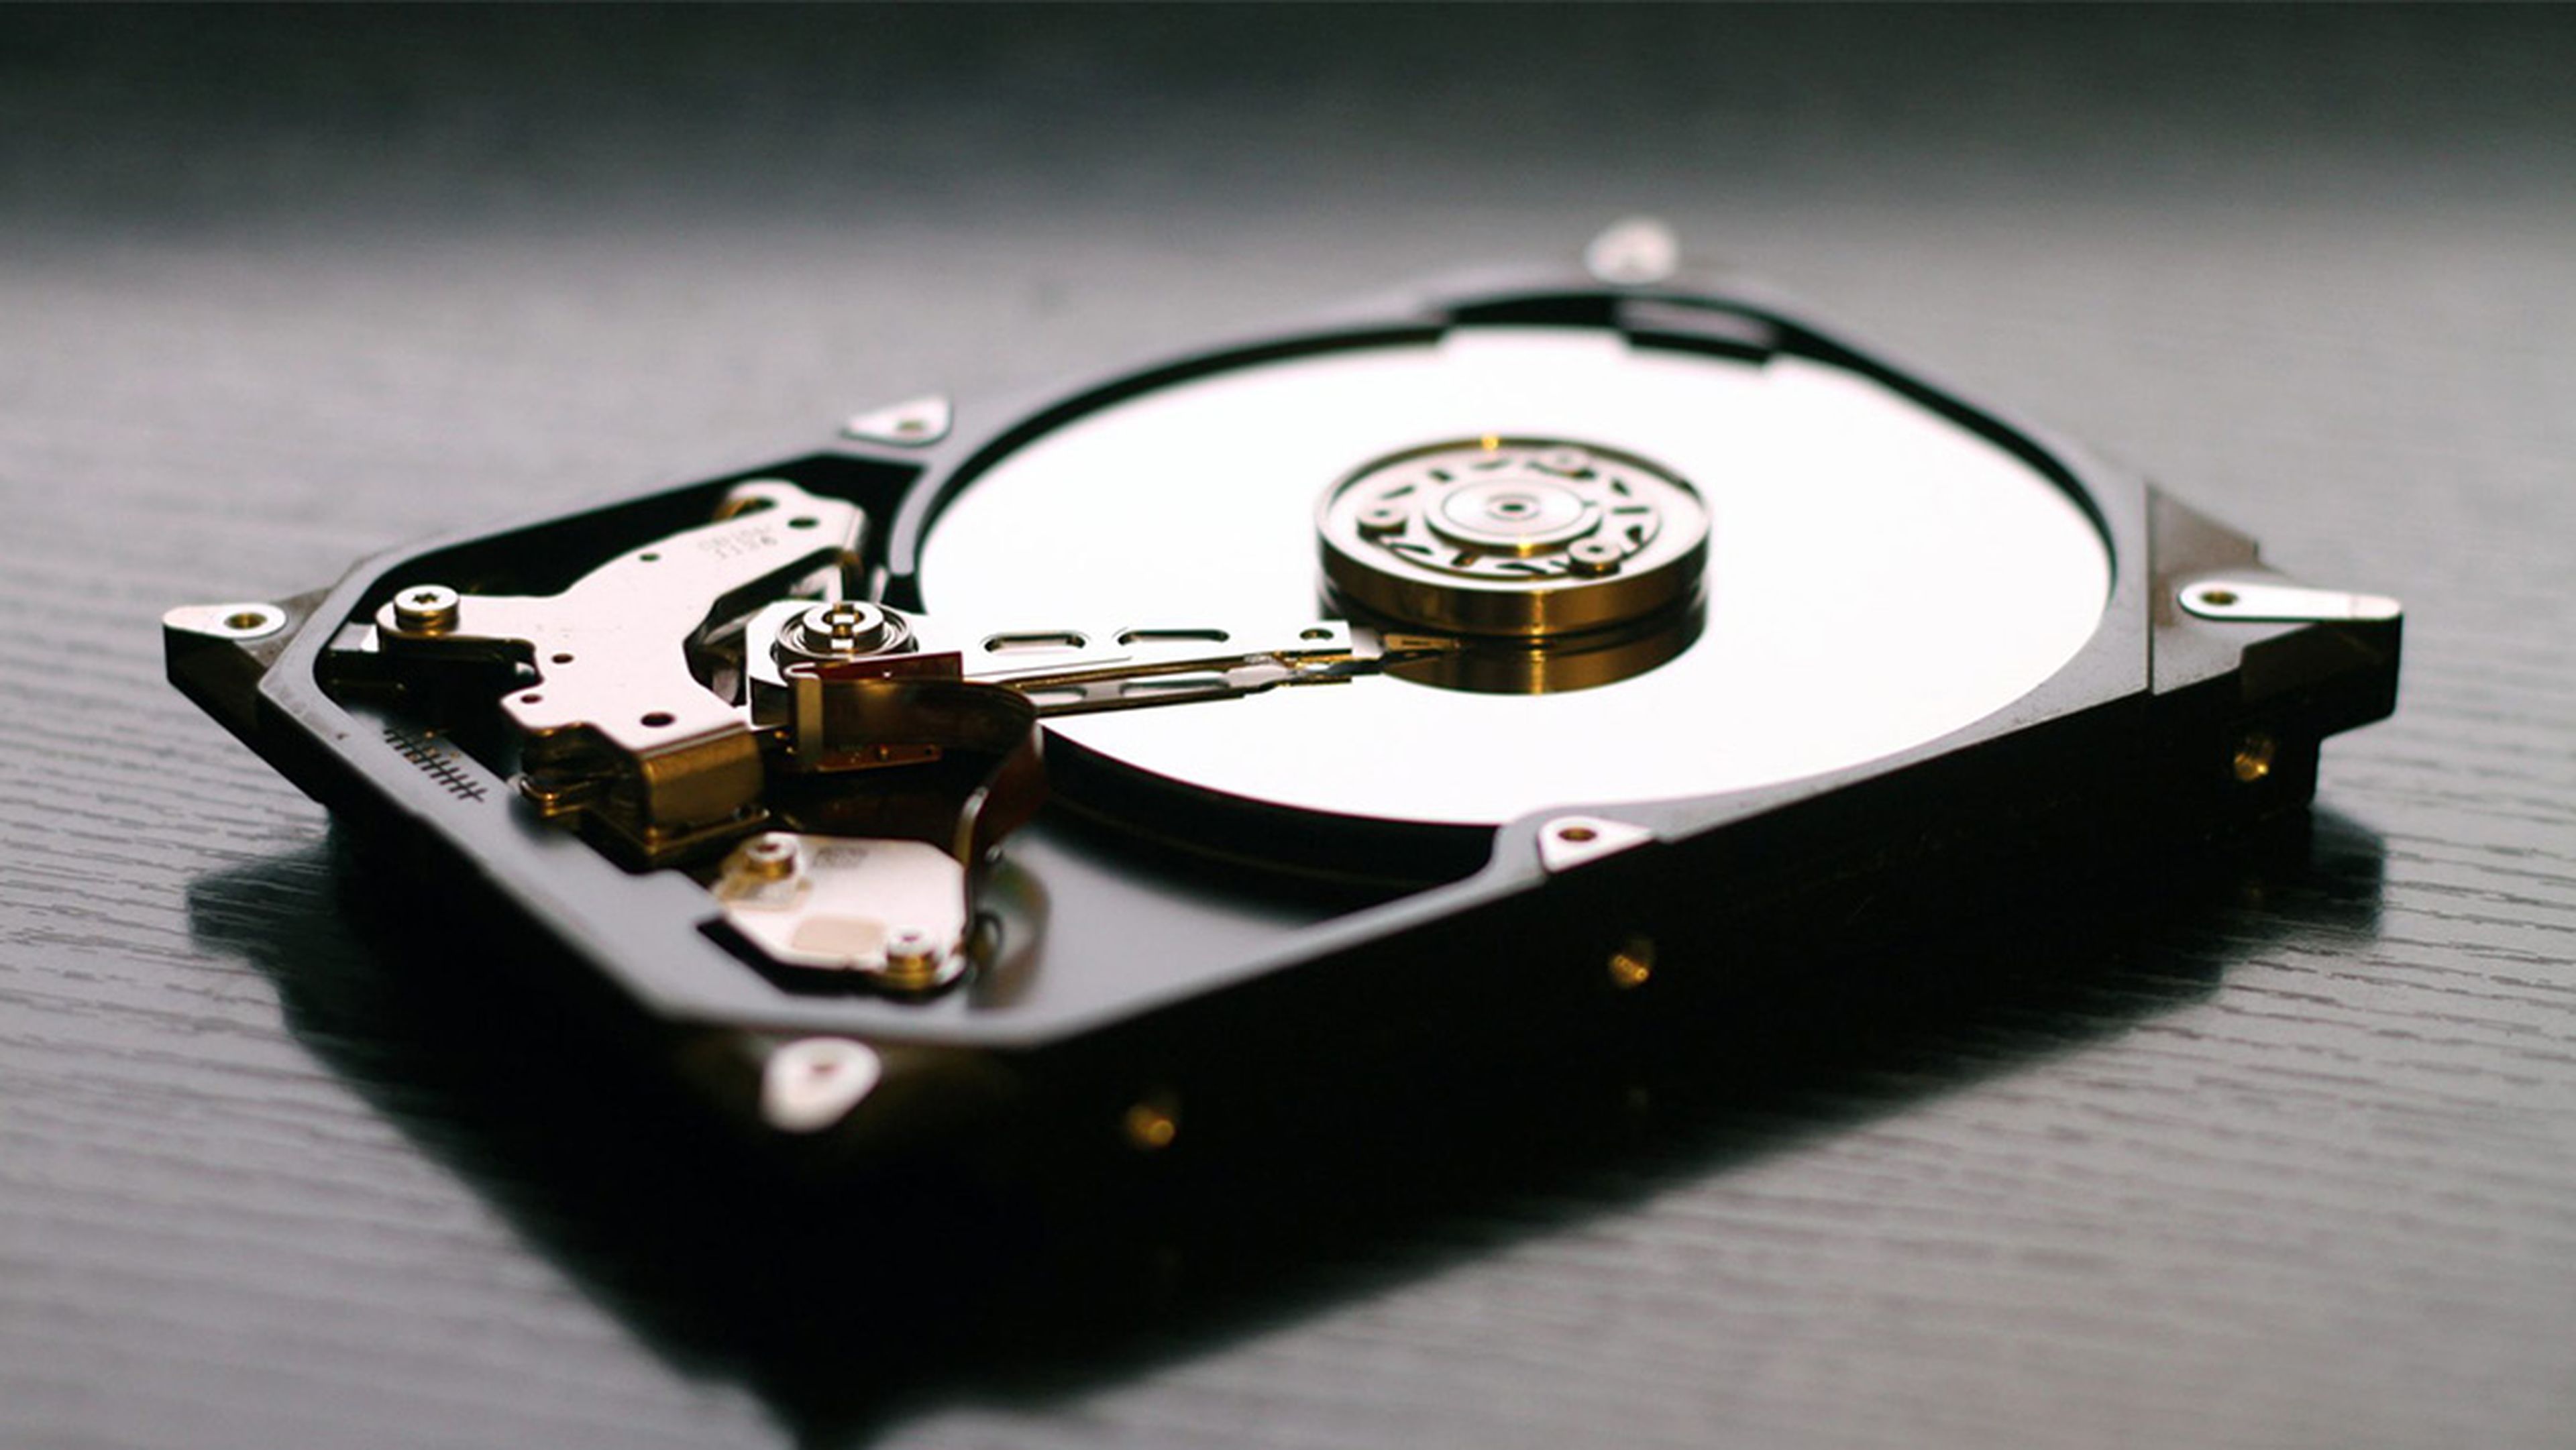 The guide to buying an internal hard drive